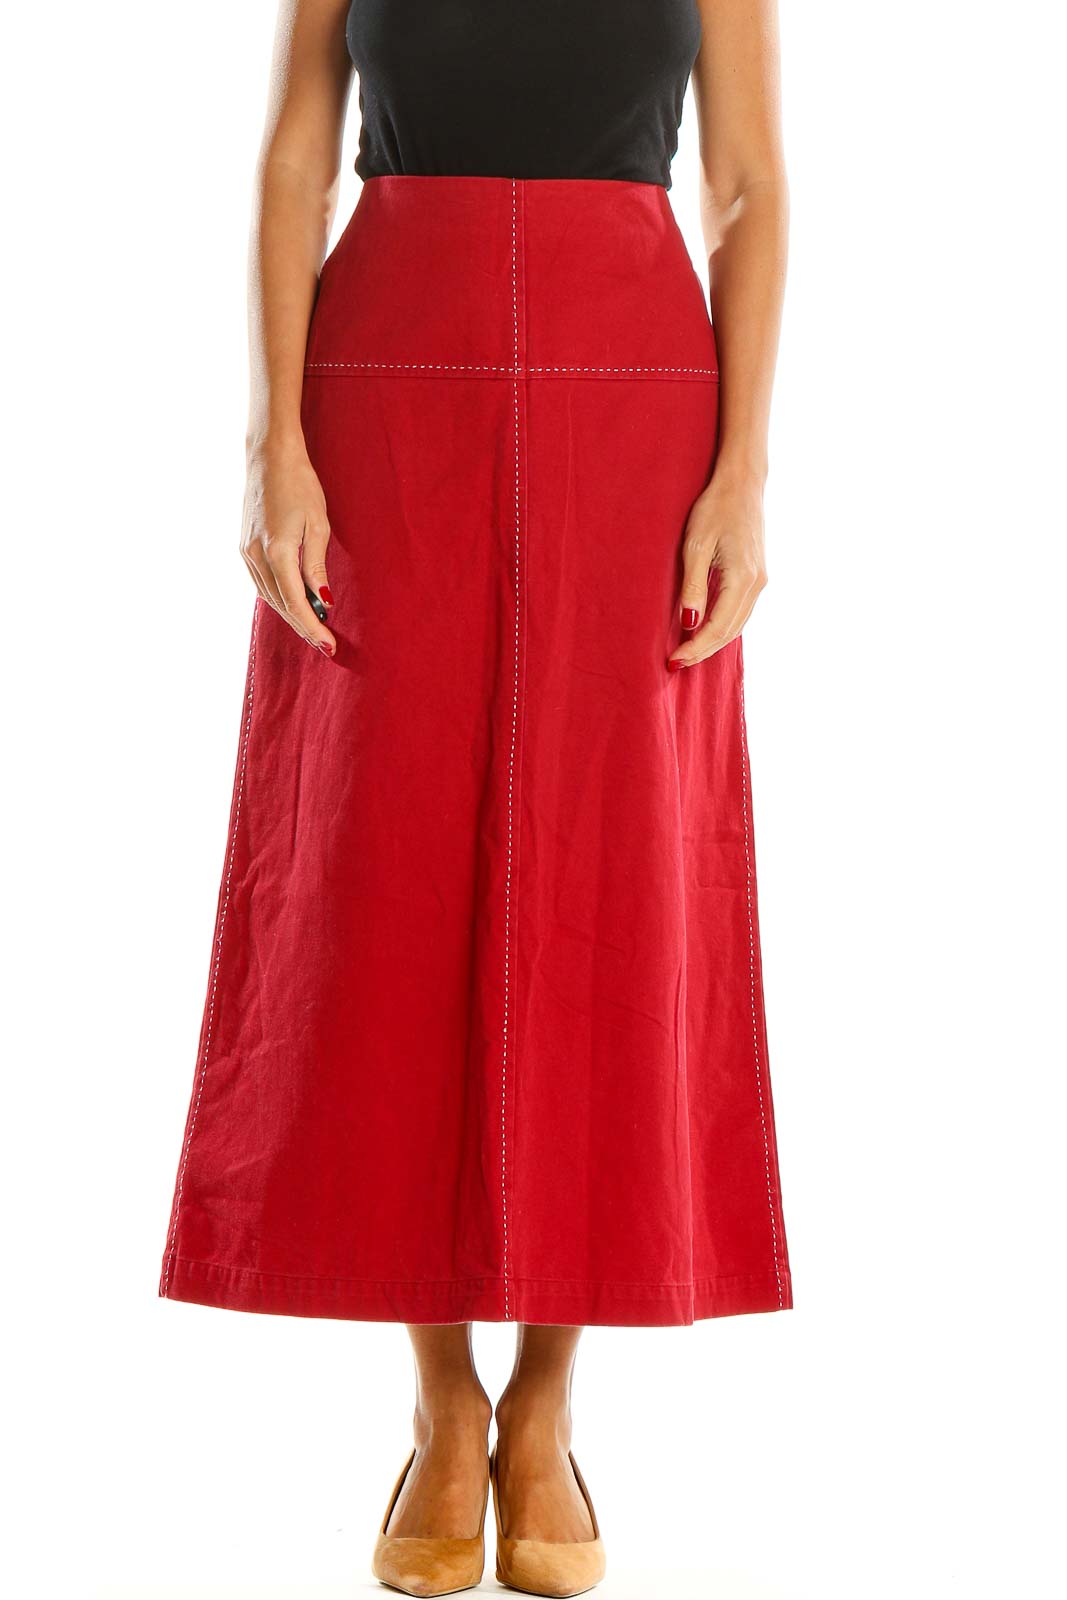 Red Retro Maxi Skirt Front